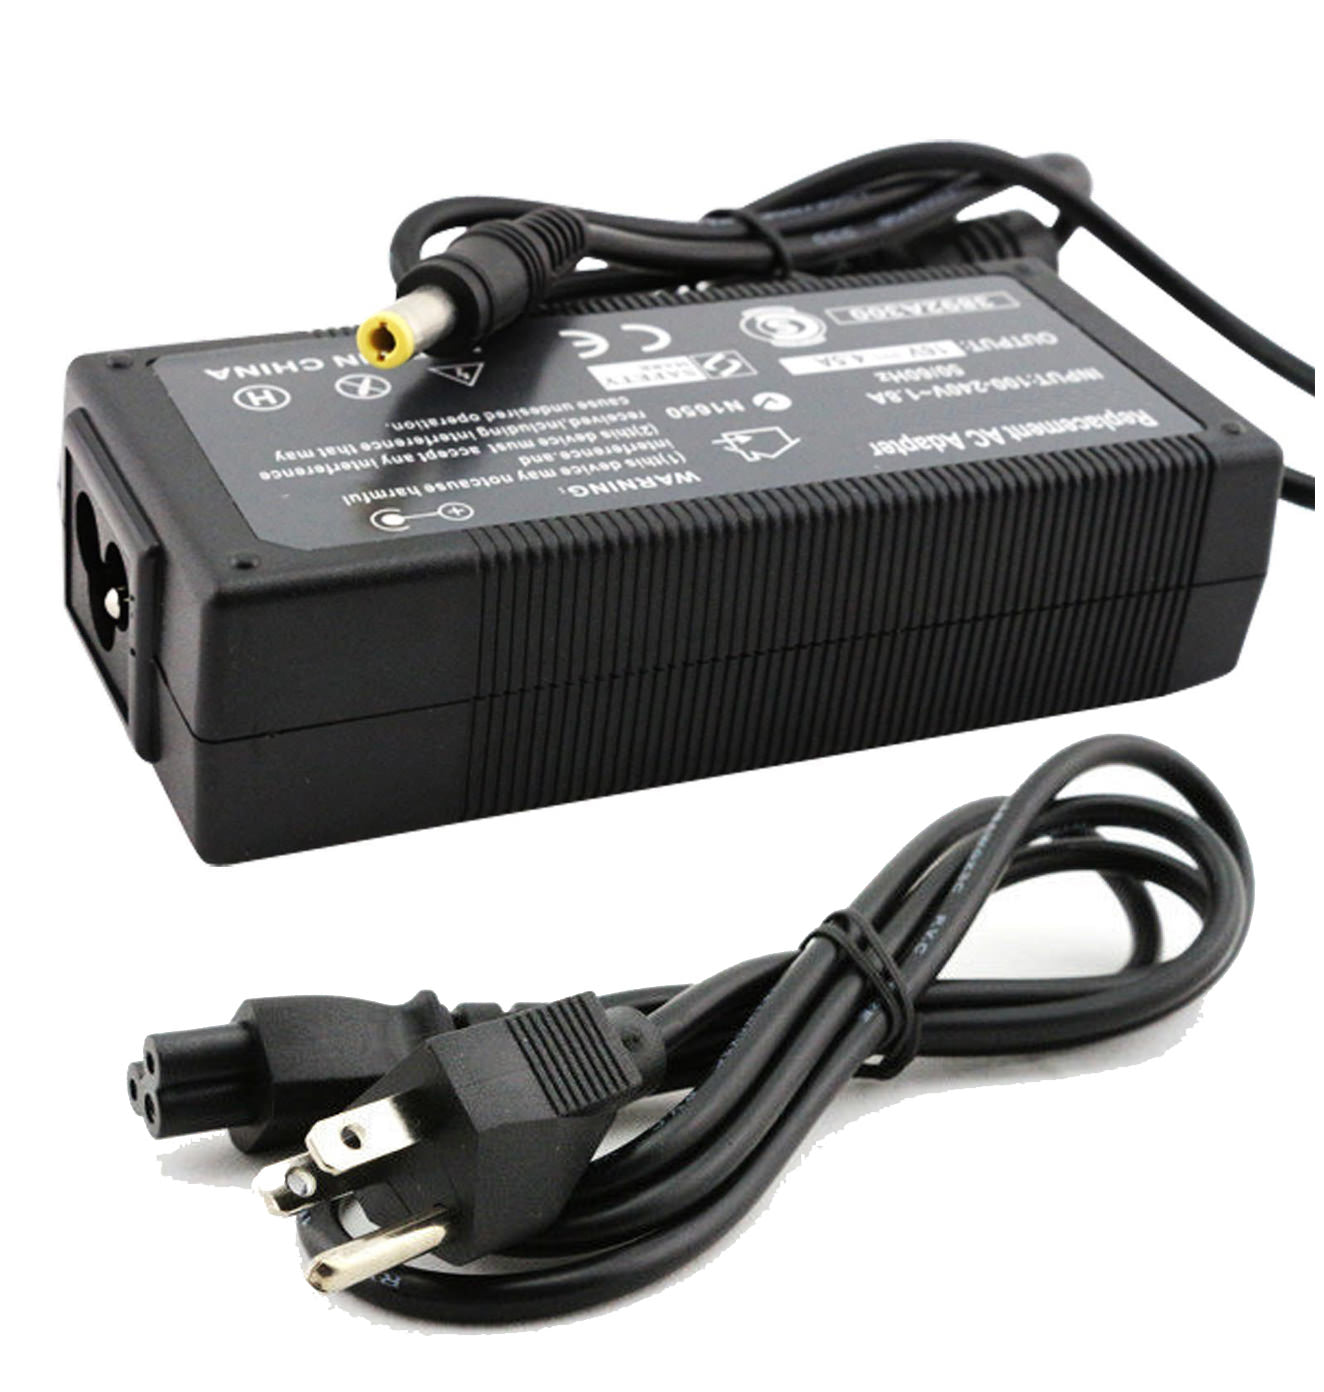 AC Adapter Charger for IBM ThinkPad T20 Notebook.